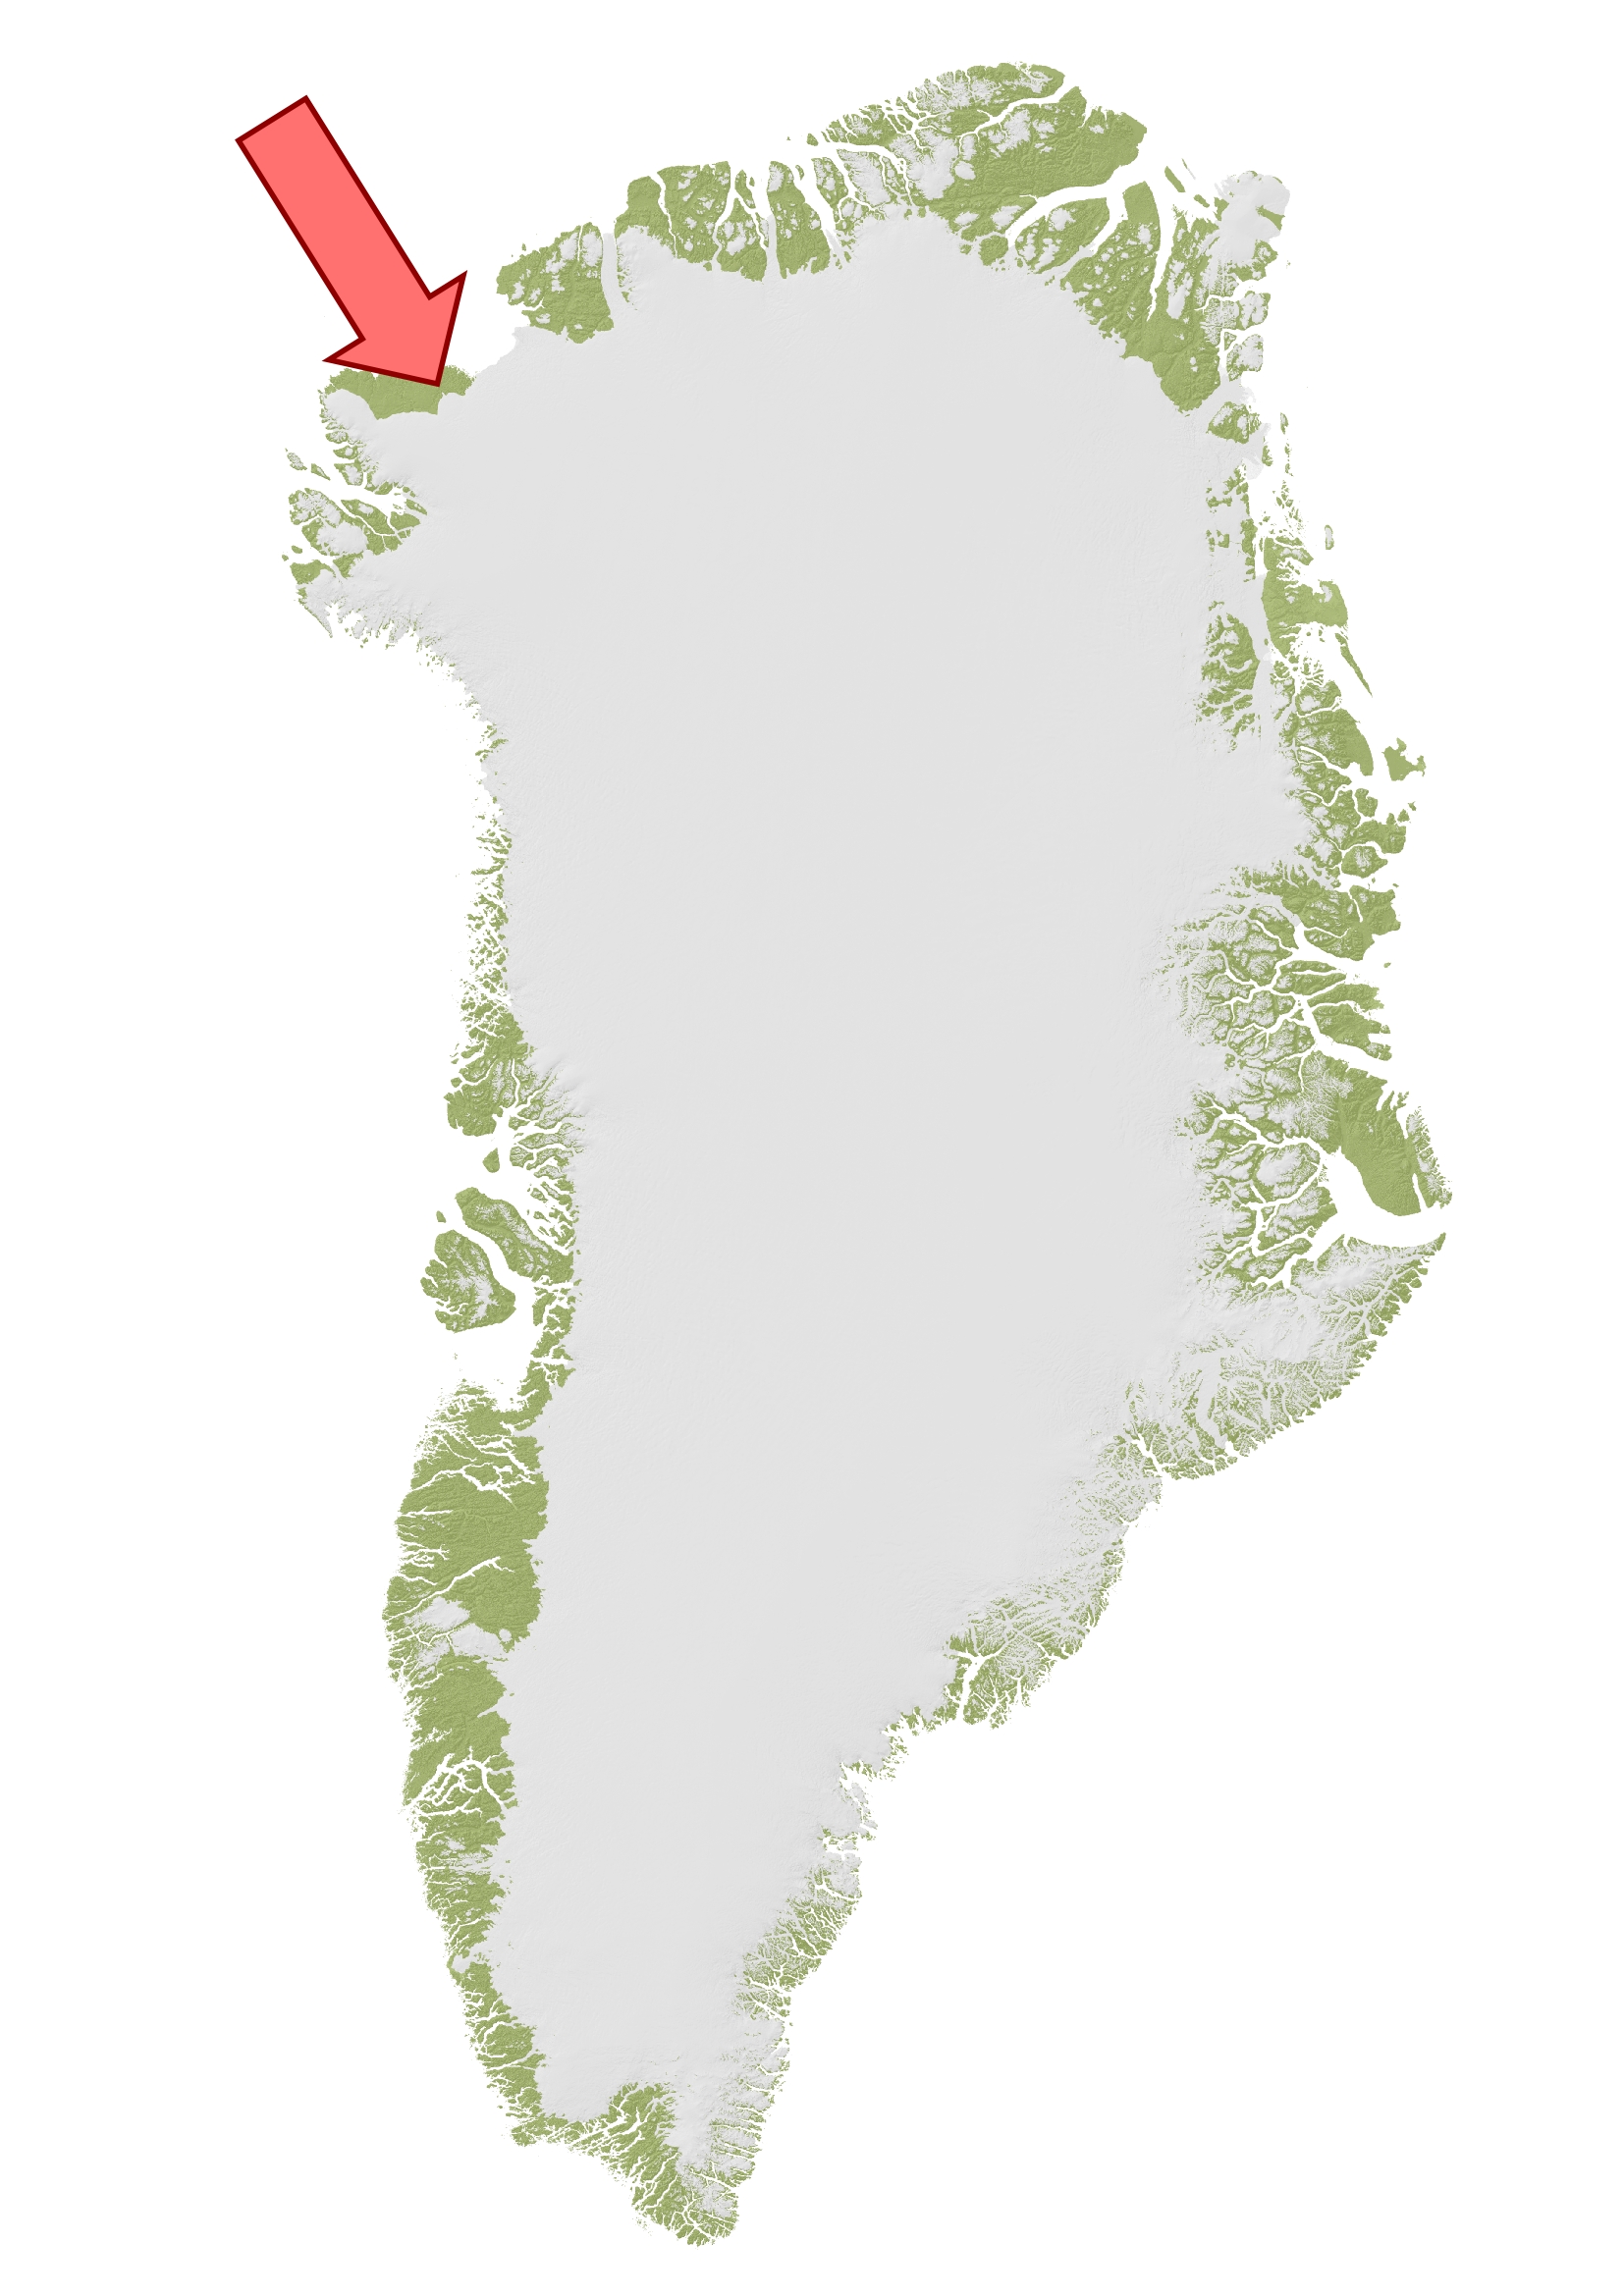 Map of Greenland showing the location of the Hiawatha impact crater in Inglefield Land, along the northwest margin of the Greenland Ice sheet.